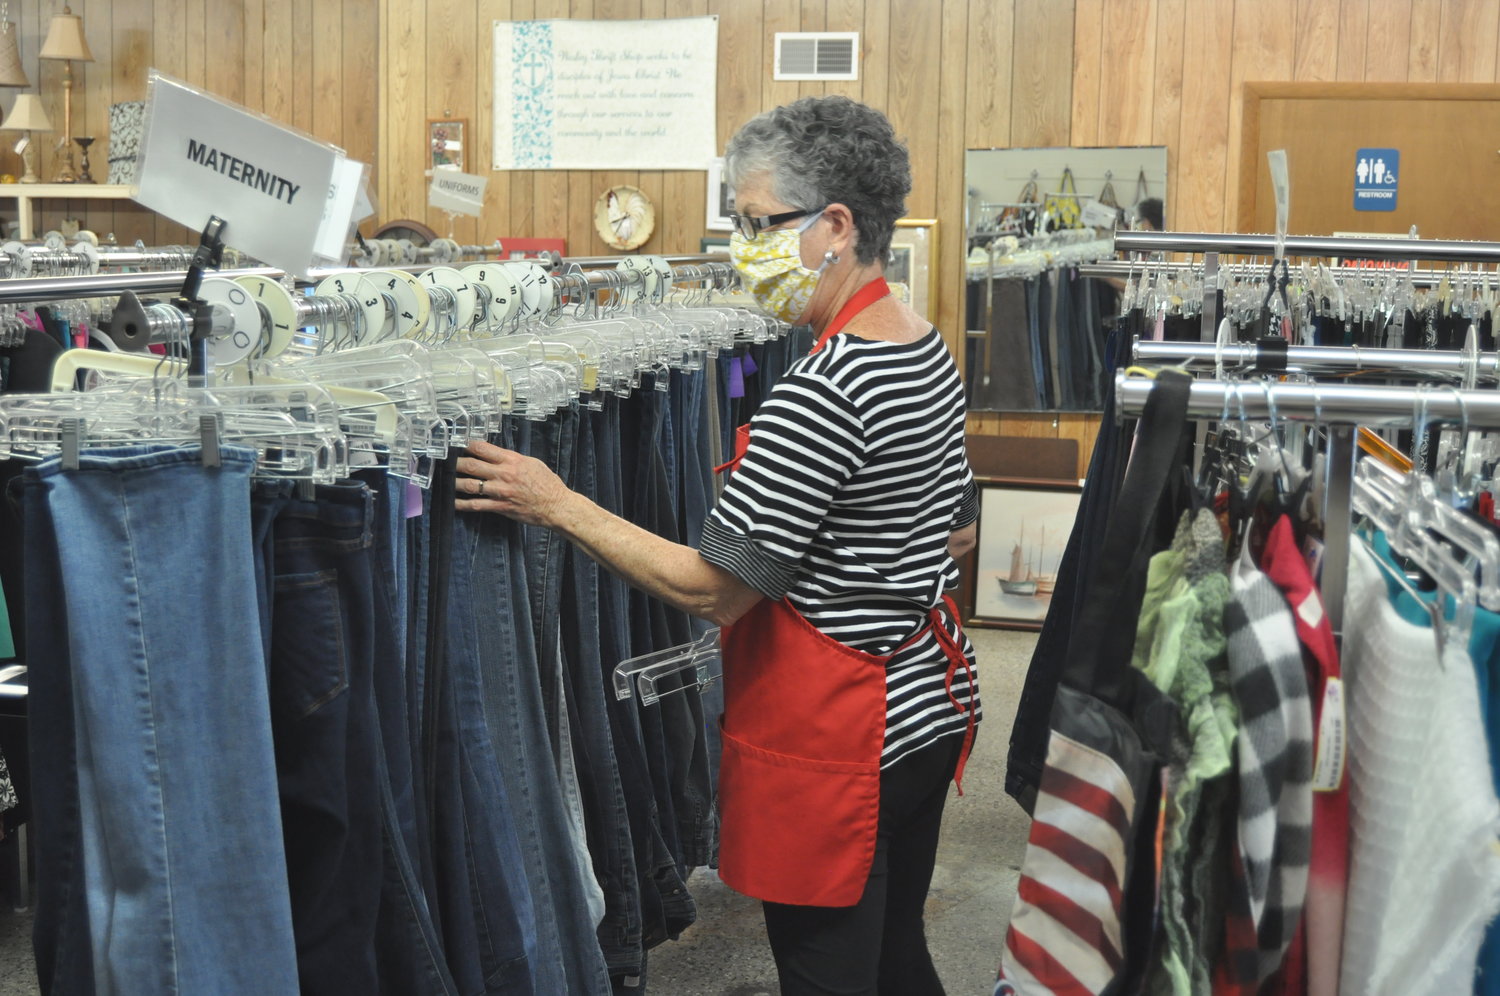 Volunteer Karen Biddle sorts through blue jeans Wednesday at the Wesley Thrift Shop. The store, a ministry of First United Methodist Church, reopened to customers this week with restrictions to limit the spread of the coronavirus.